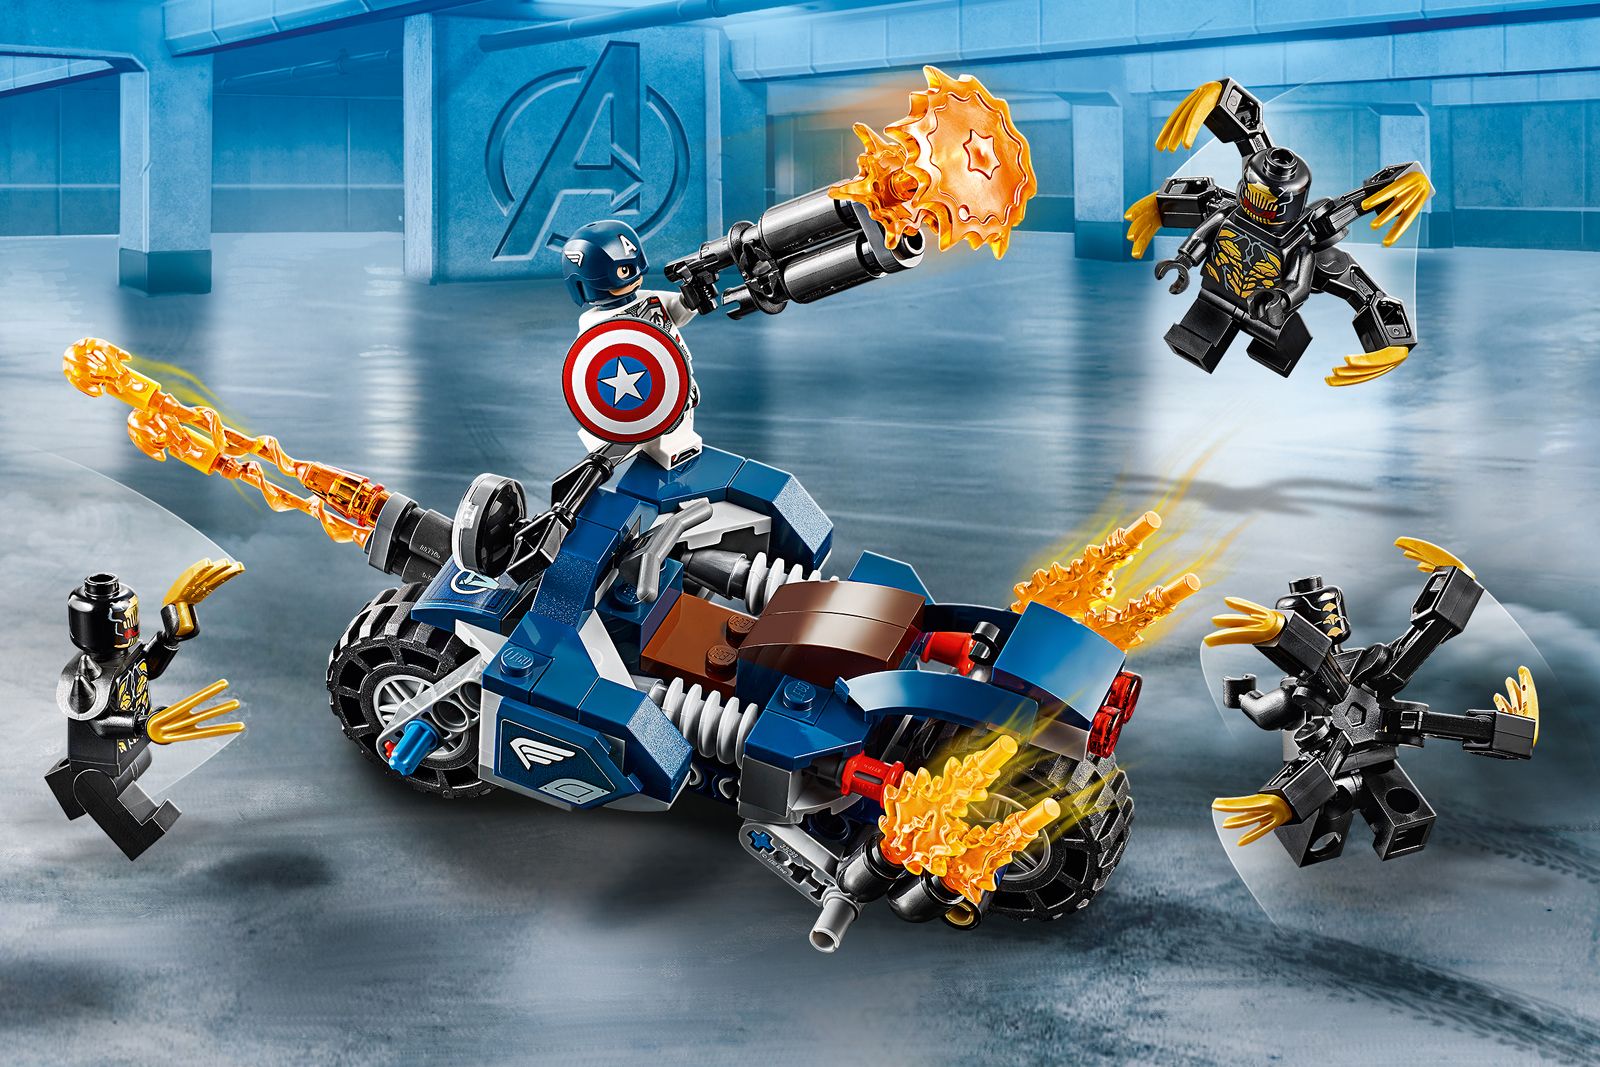 Lego goes all out for Avengers Endgame with these epic sets image 2